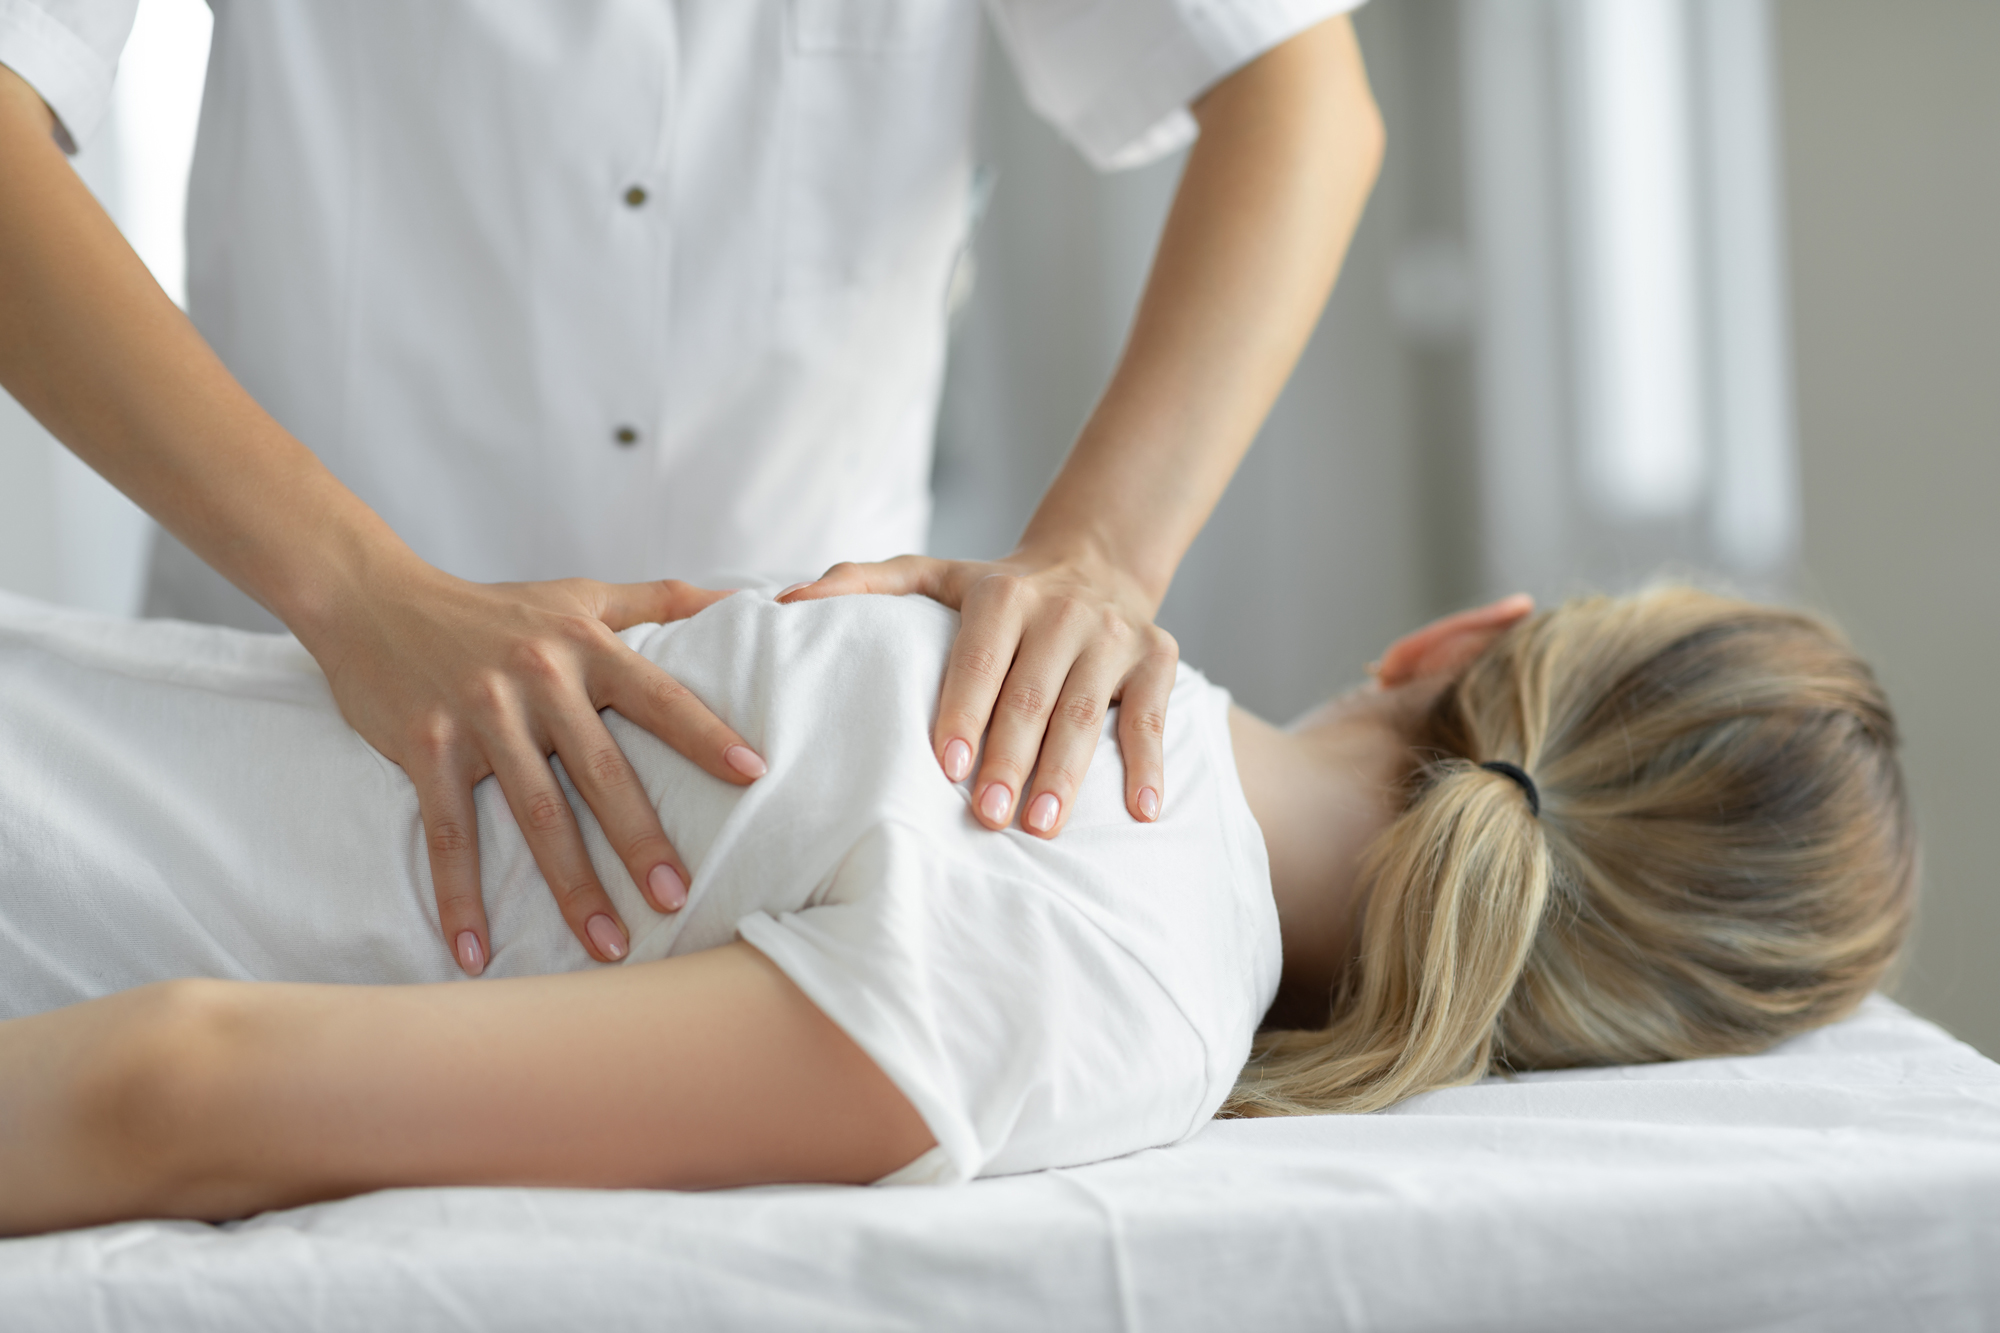 Female receiving osteopathy treatment